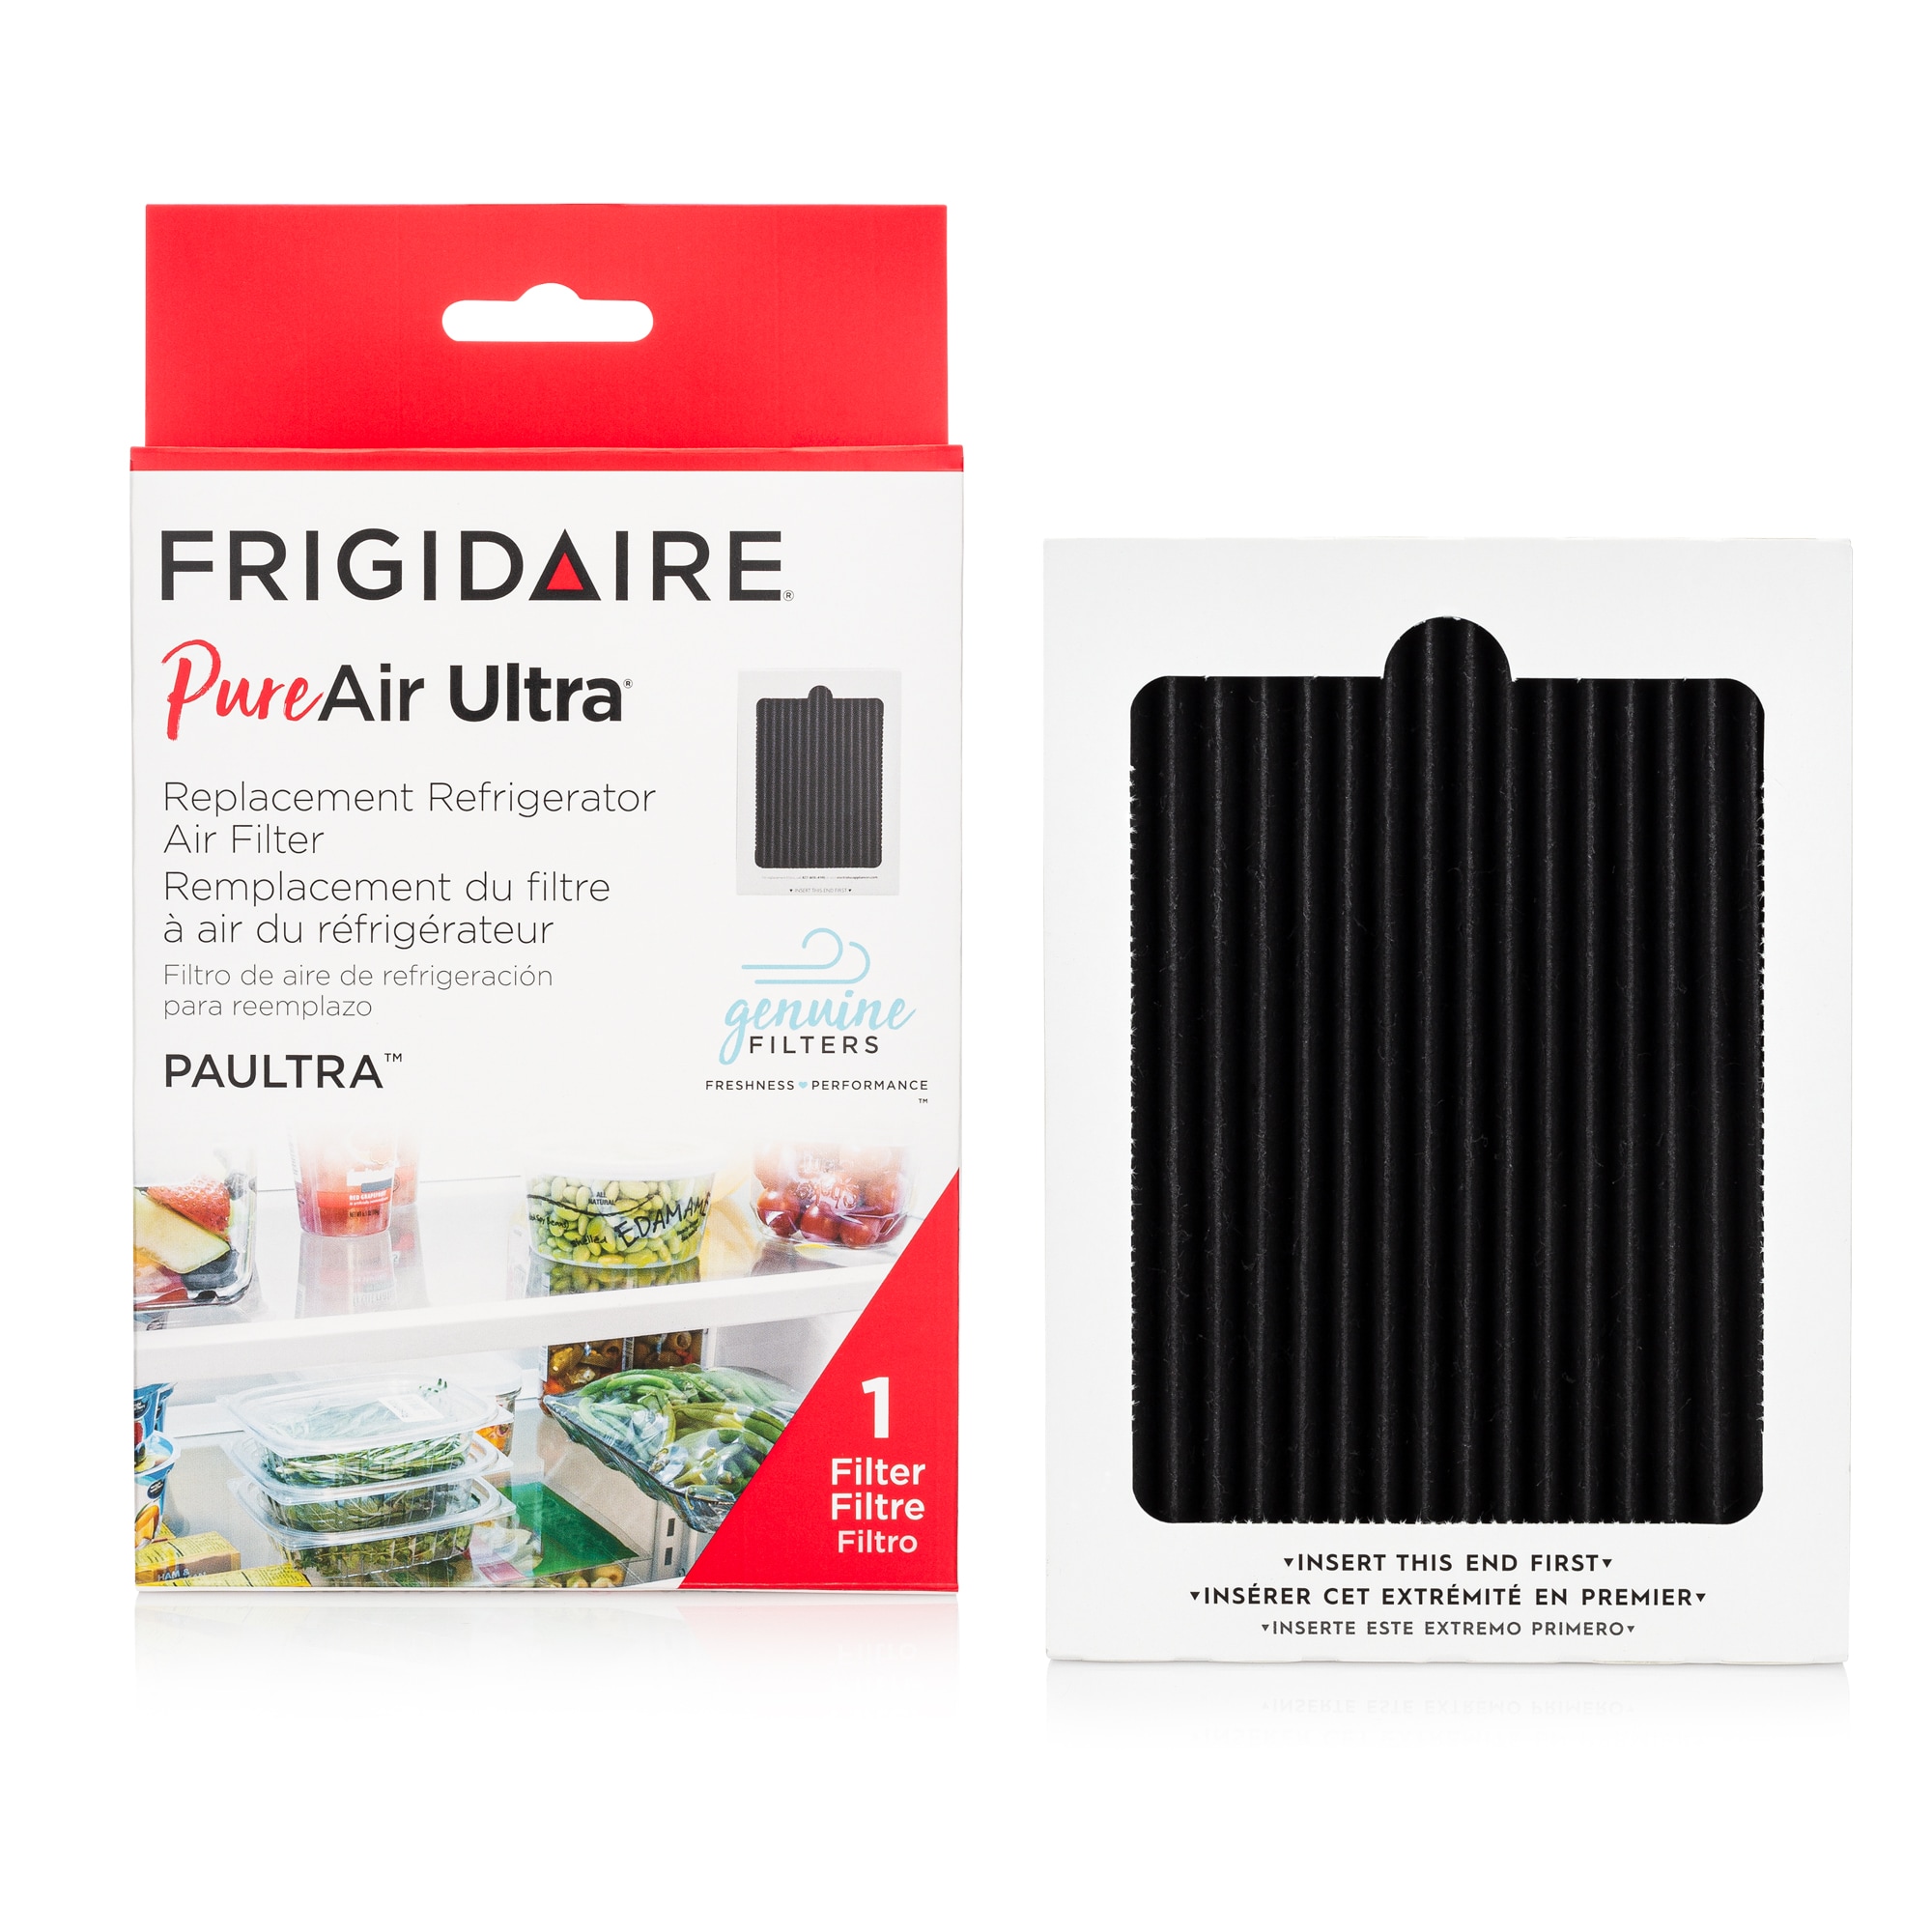 NEW Refrigerator Air Filter Replacement for Frigidaire Paultra Unverisal USA 